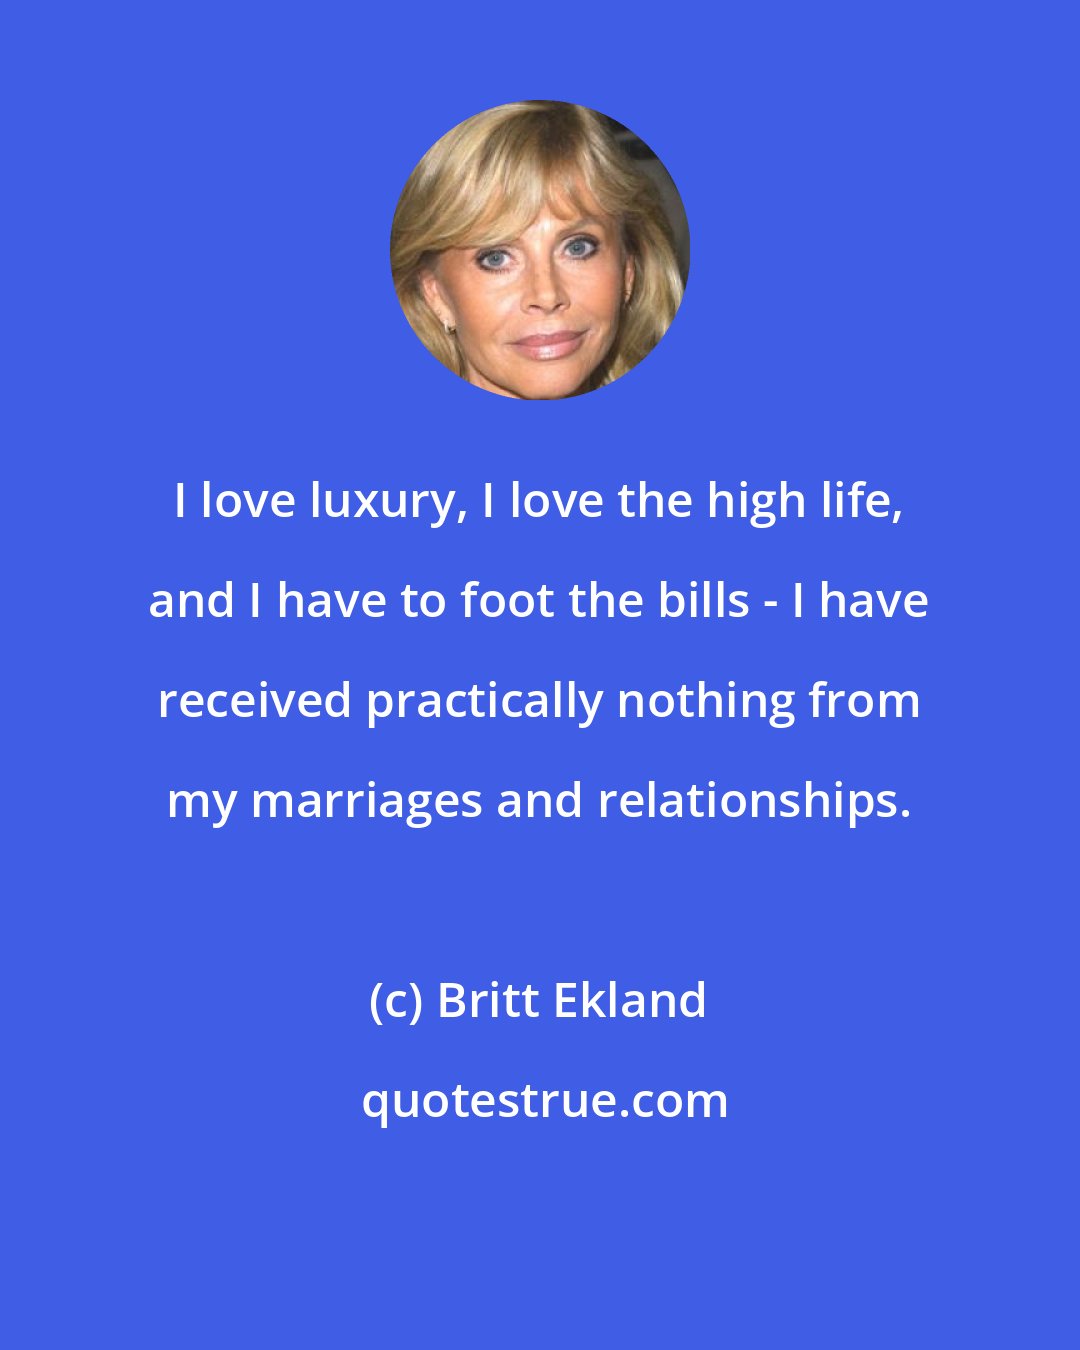 Britt Ekland: I love luxury, I love the high life, and I have to foot the bills - I have received practically nothing from my marriages and relationships.